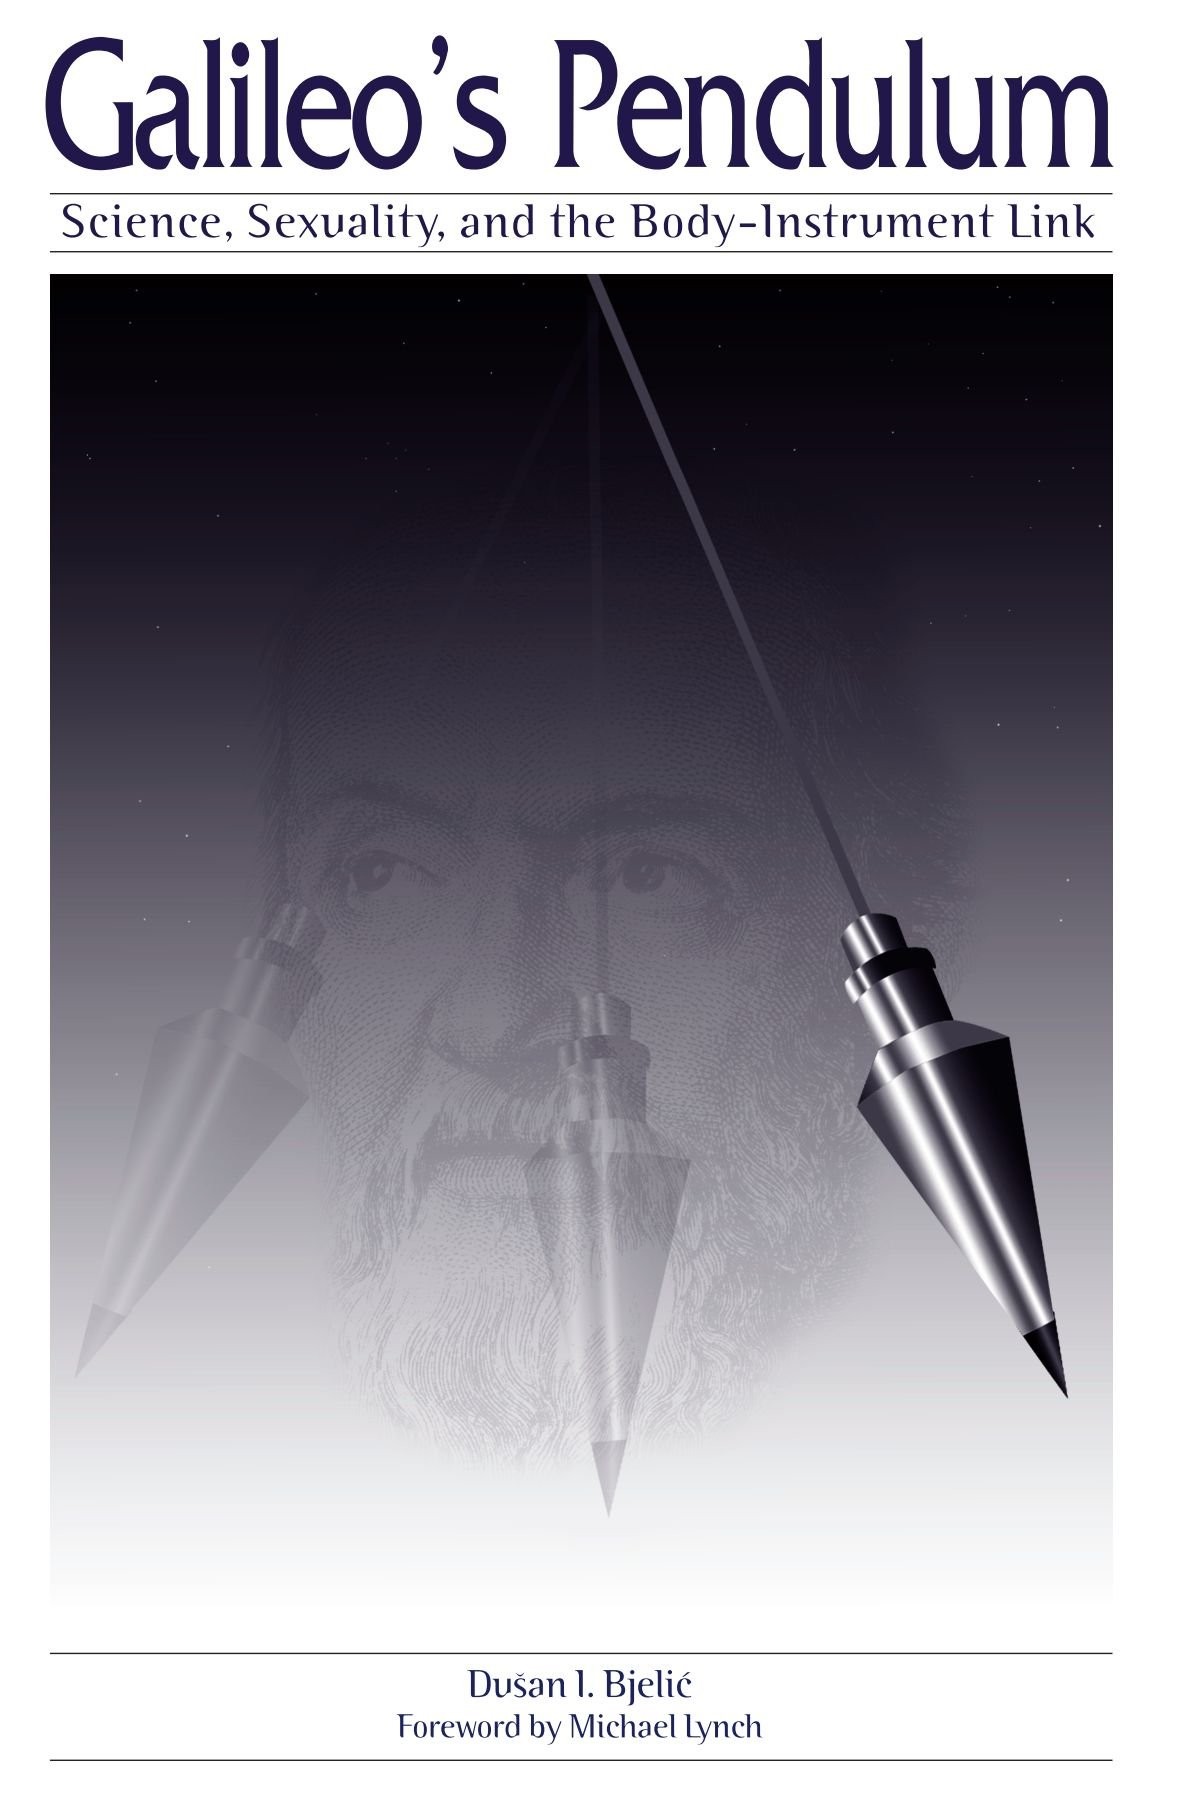 Galileo's Pendulum: Science, Sexuality, and the Body-Instrument Link